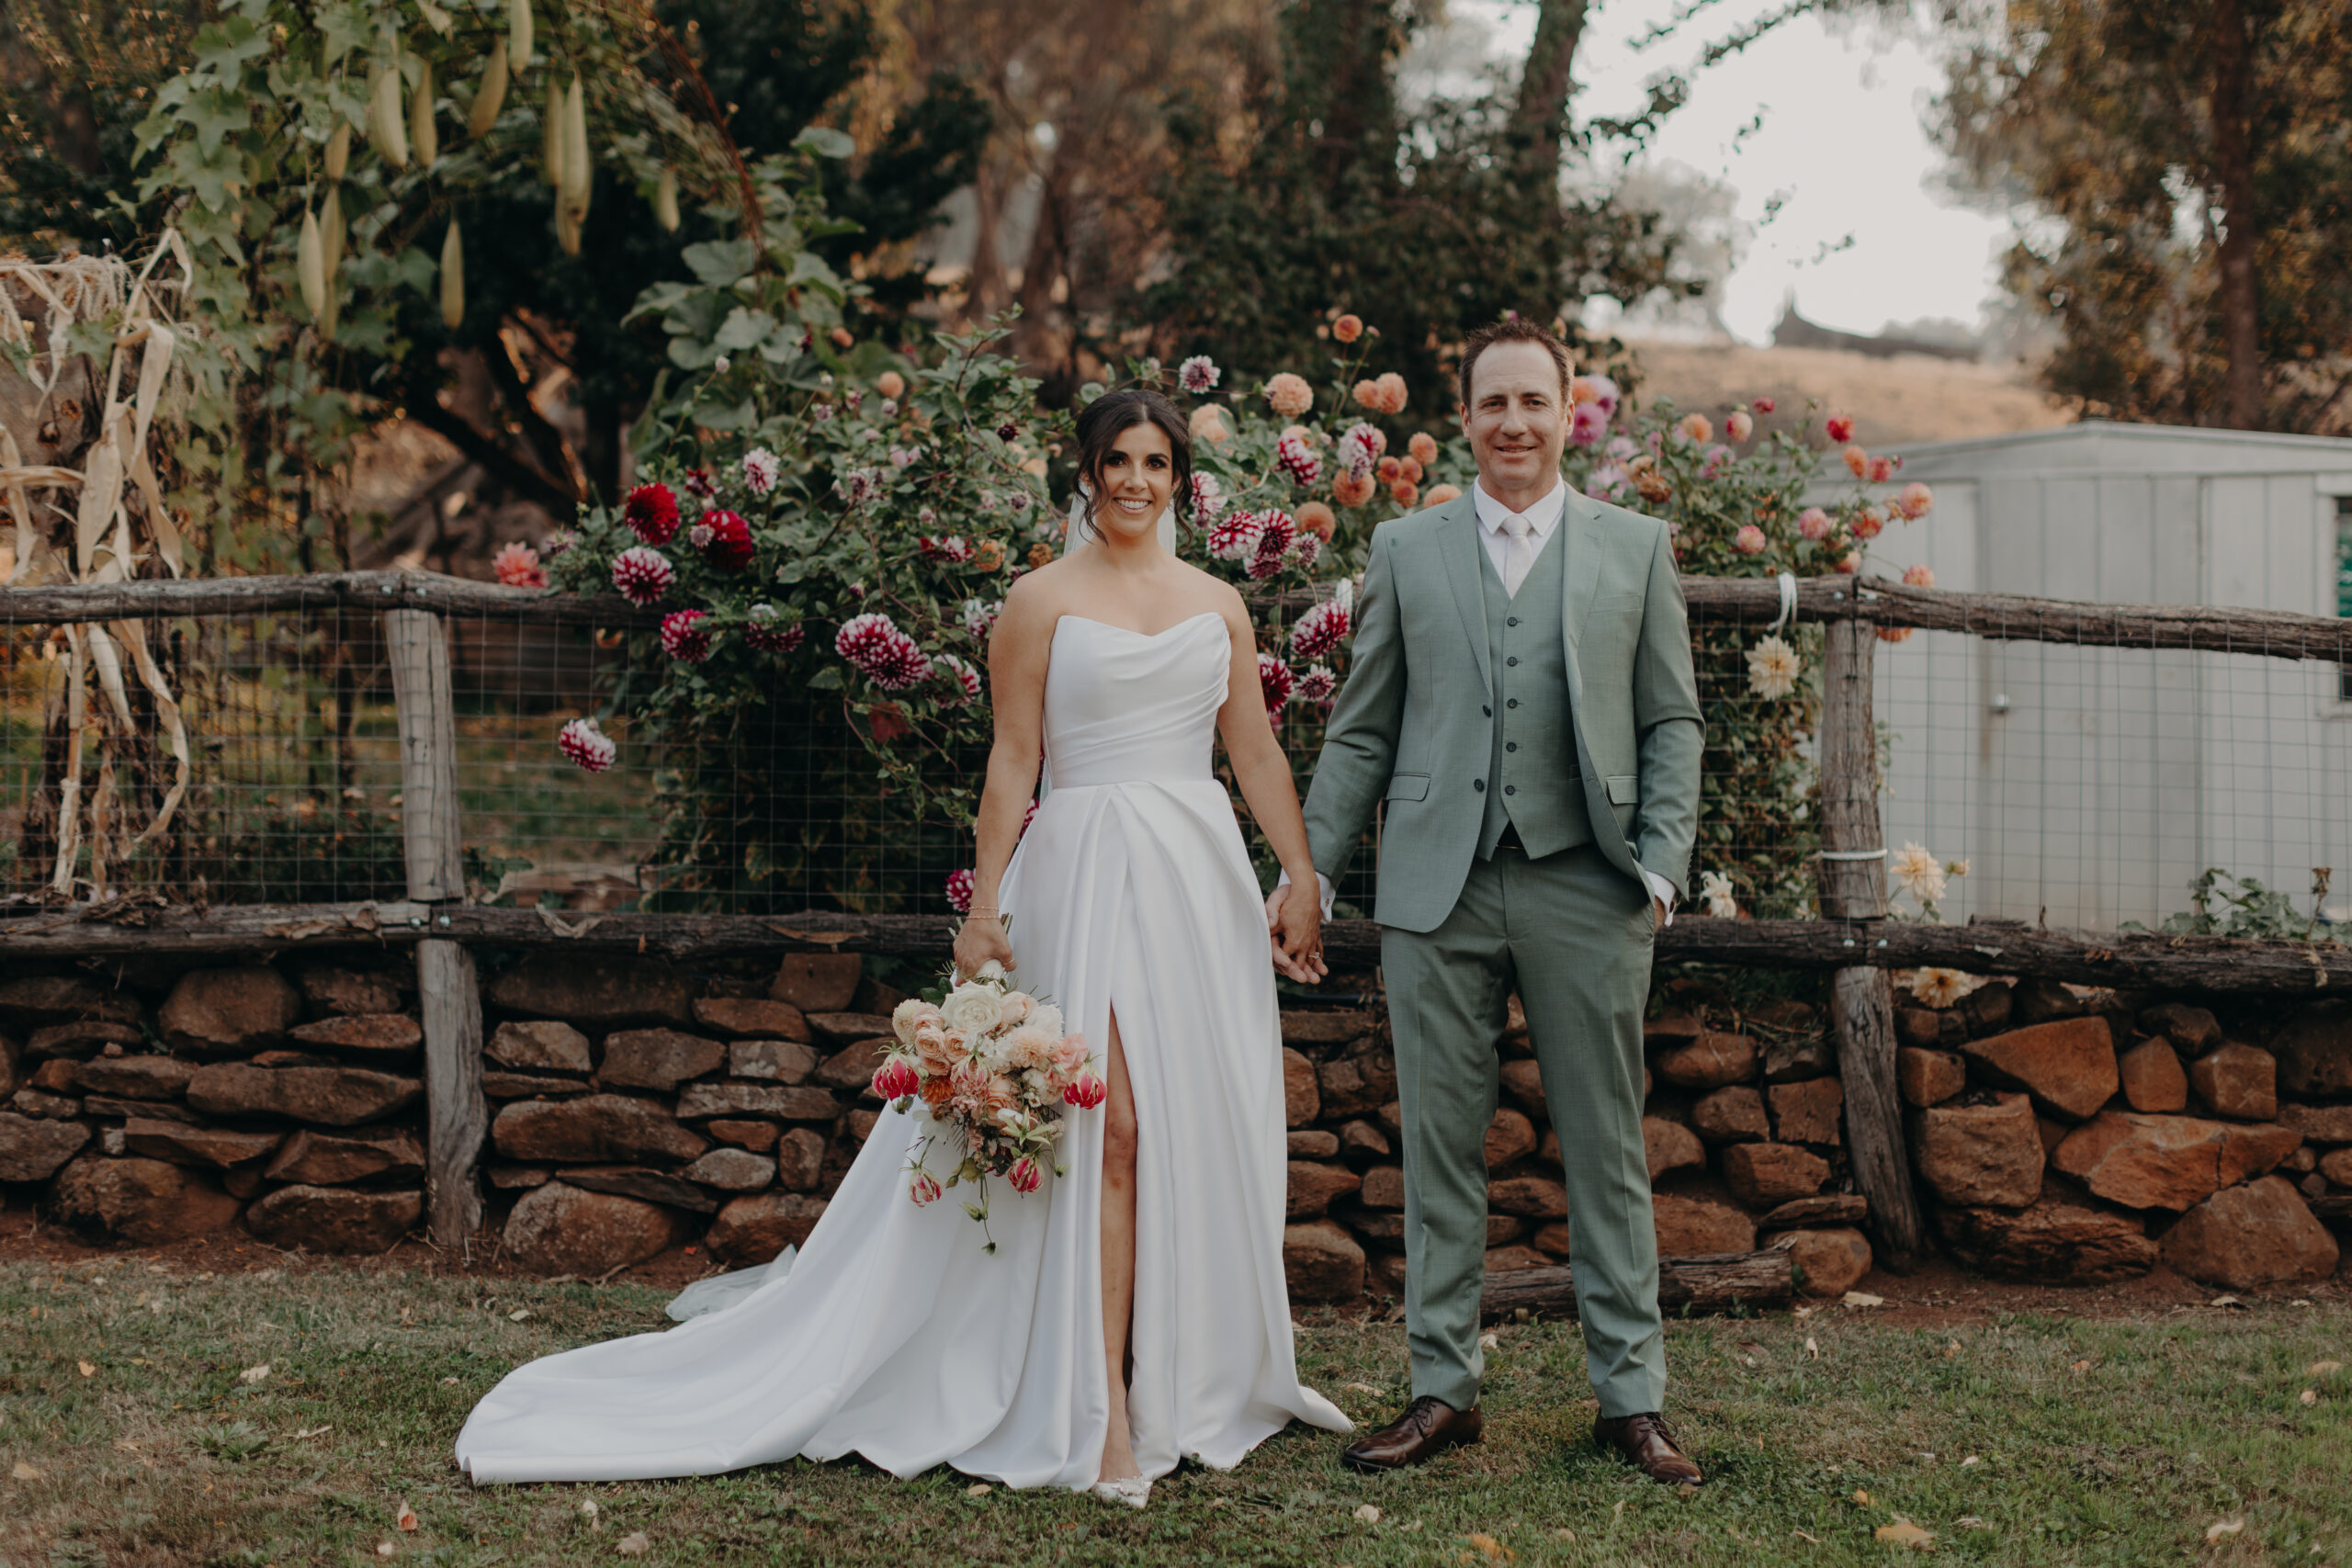 Jess and Shans Farm Marquee Wedding in the King Valley